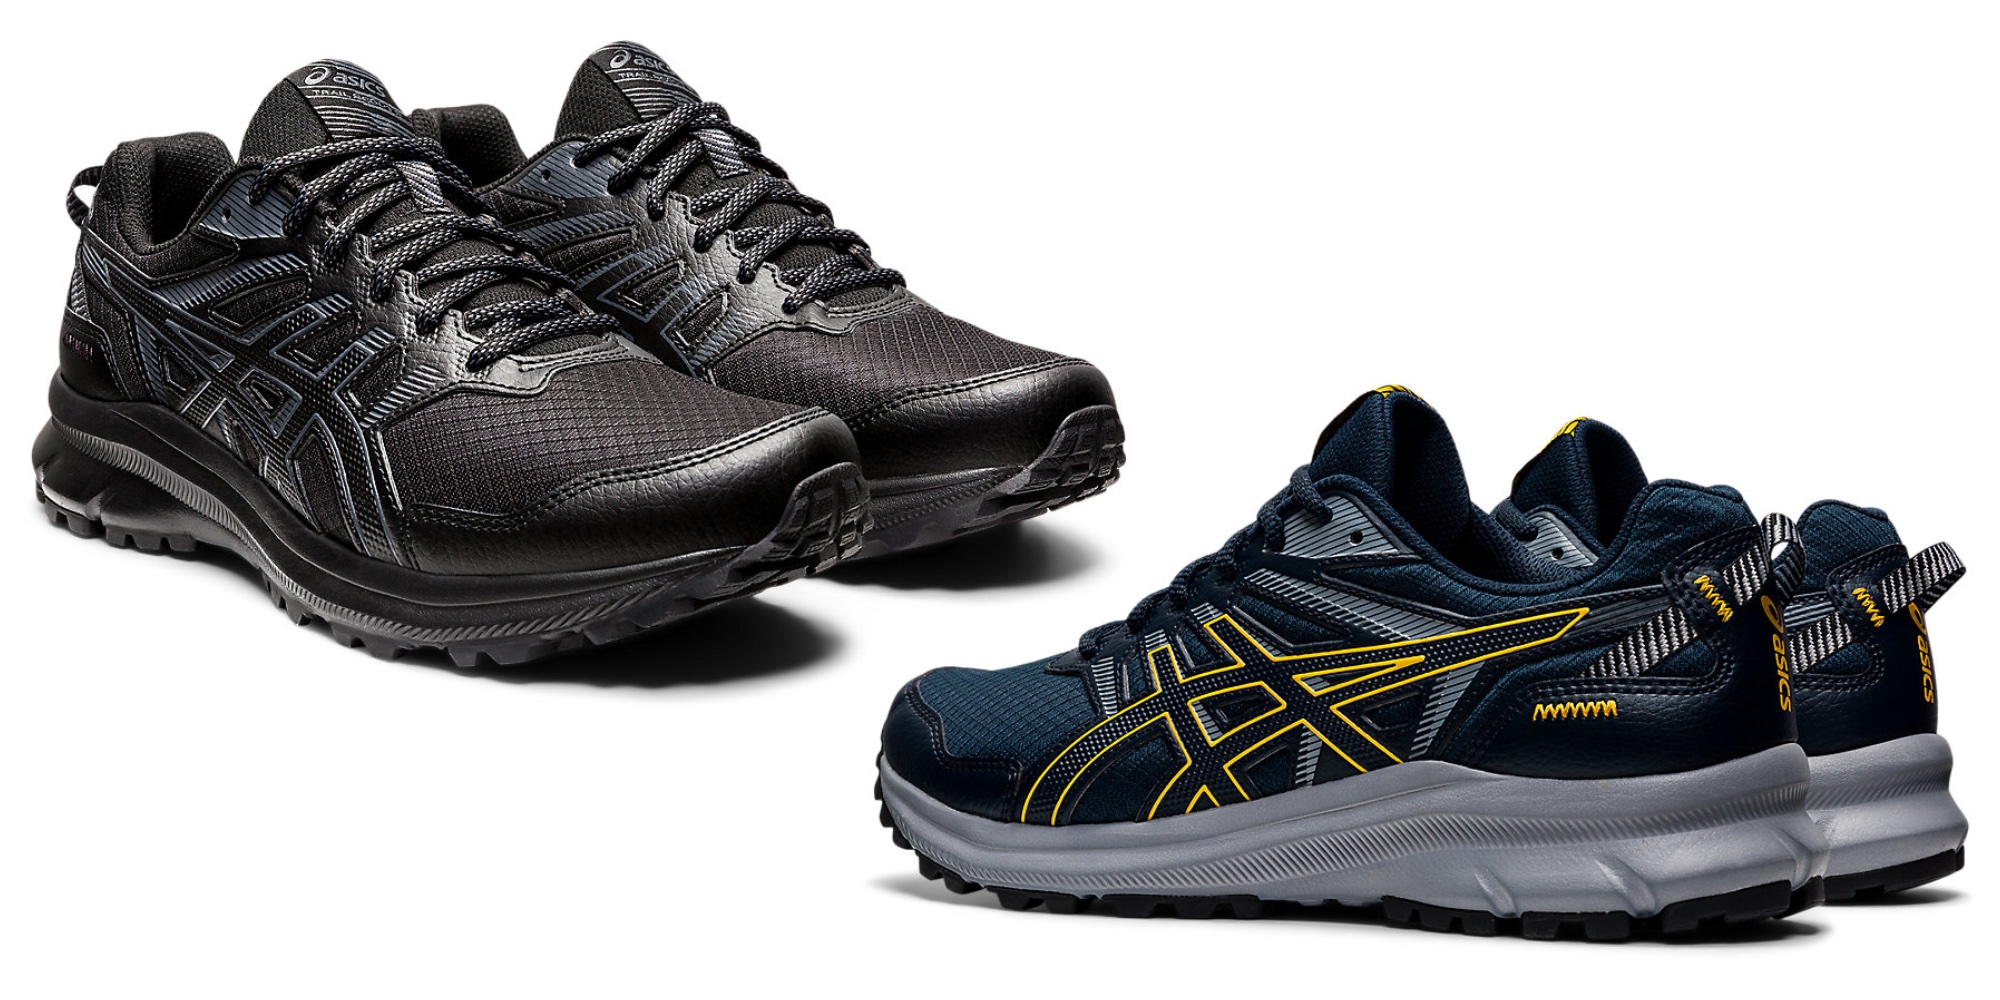 Perth Blackborough Entrance Fascinate Score a pair of ASICS Trail Scout 2 Running Shoes for just $24 (Reg. $60)